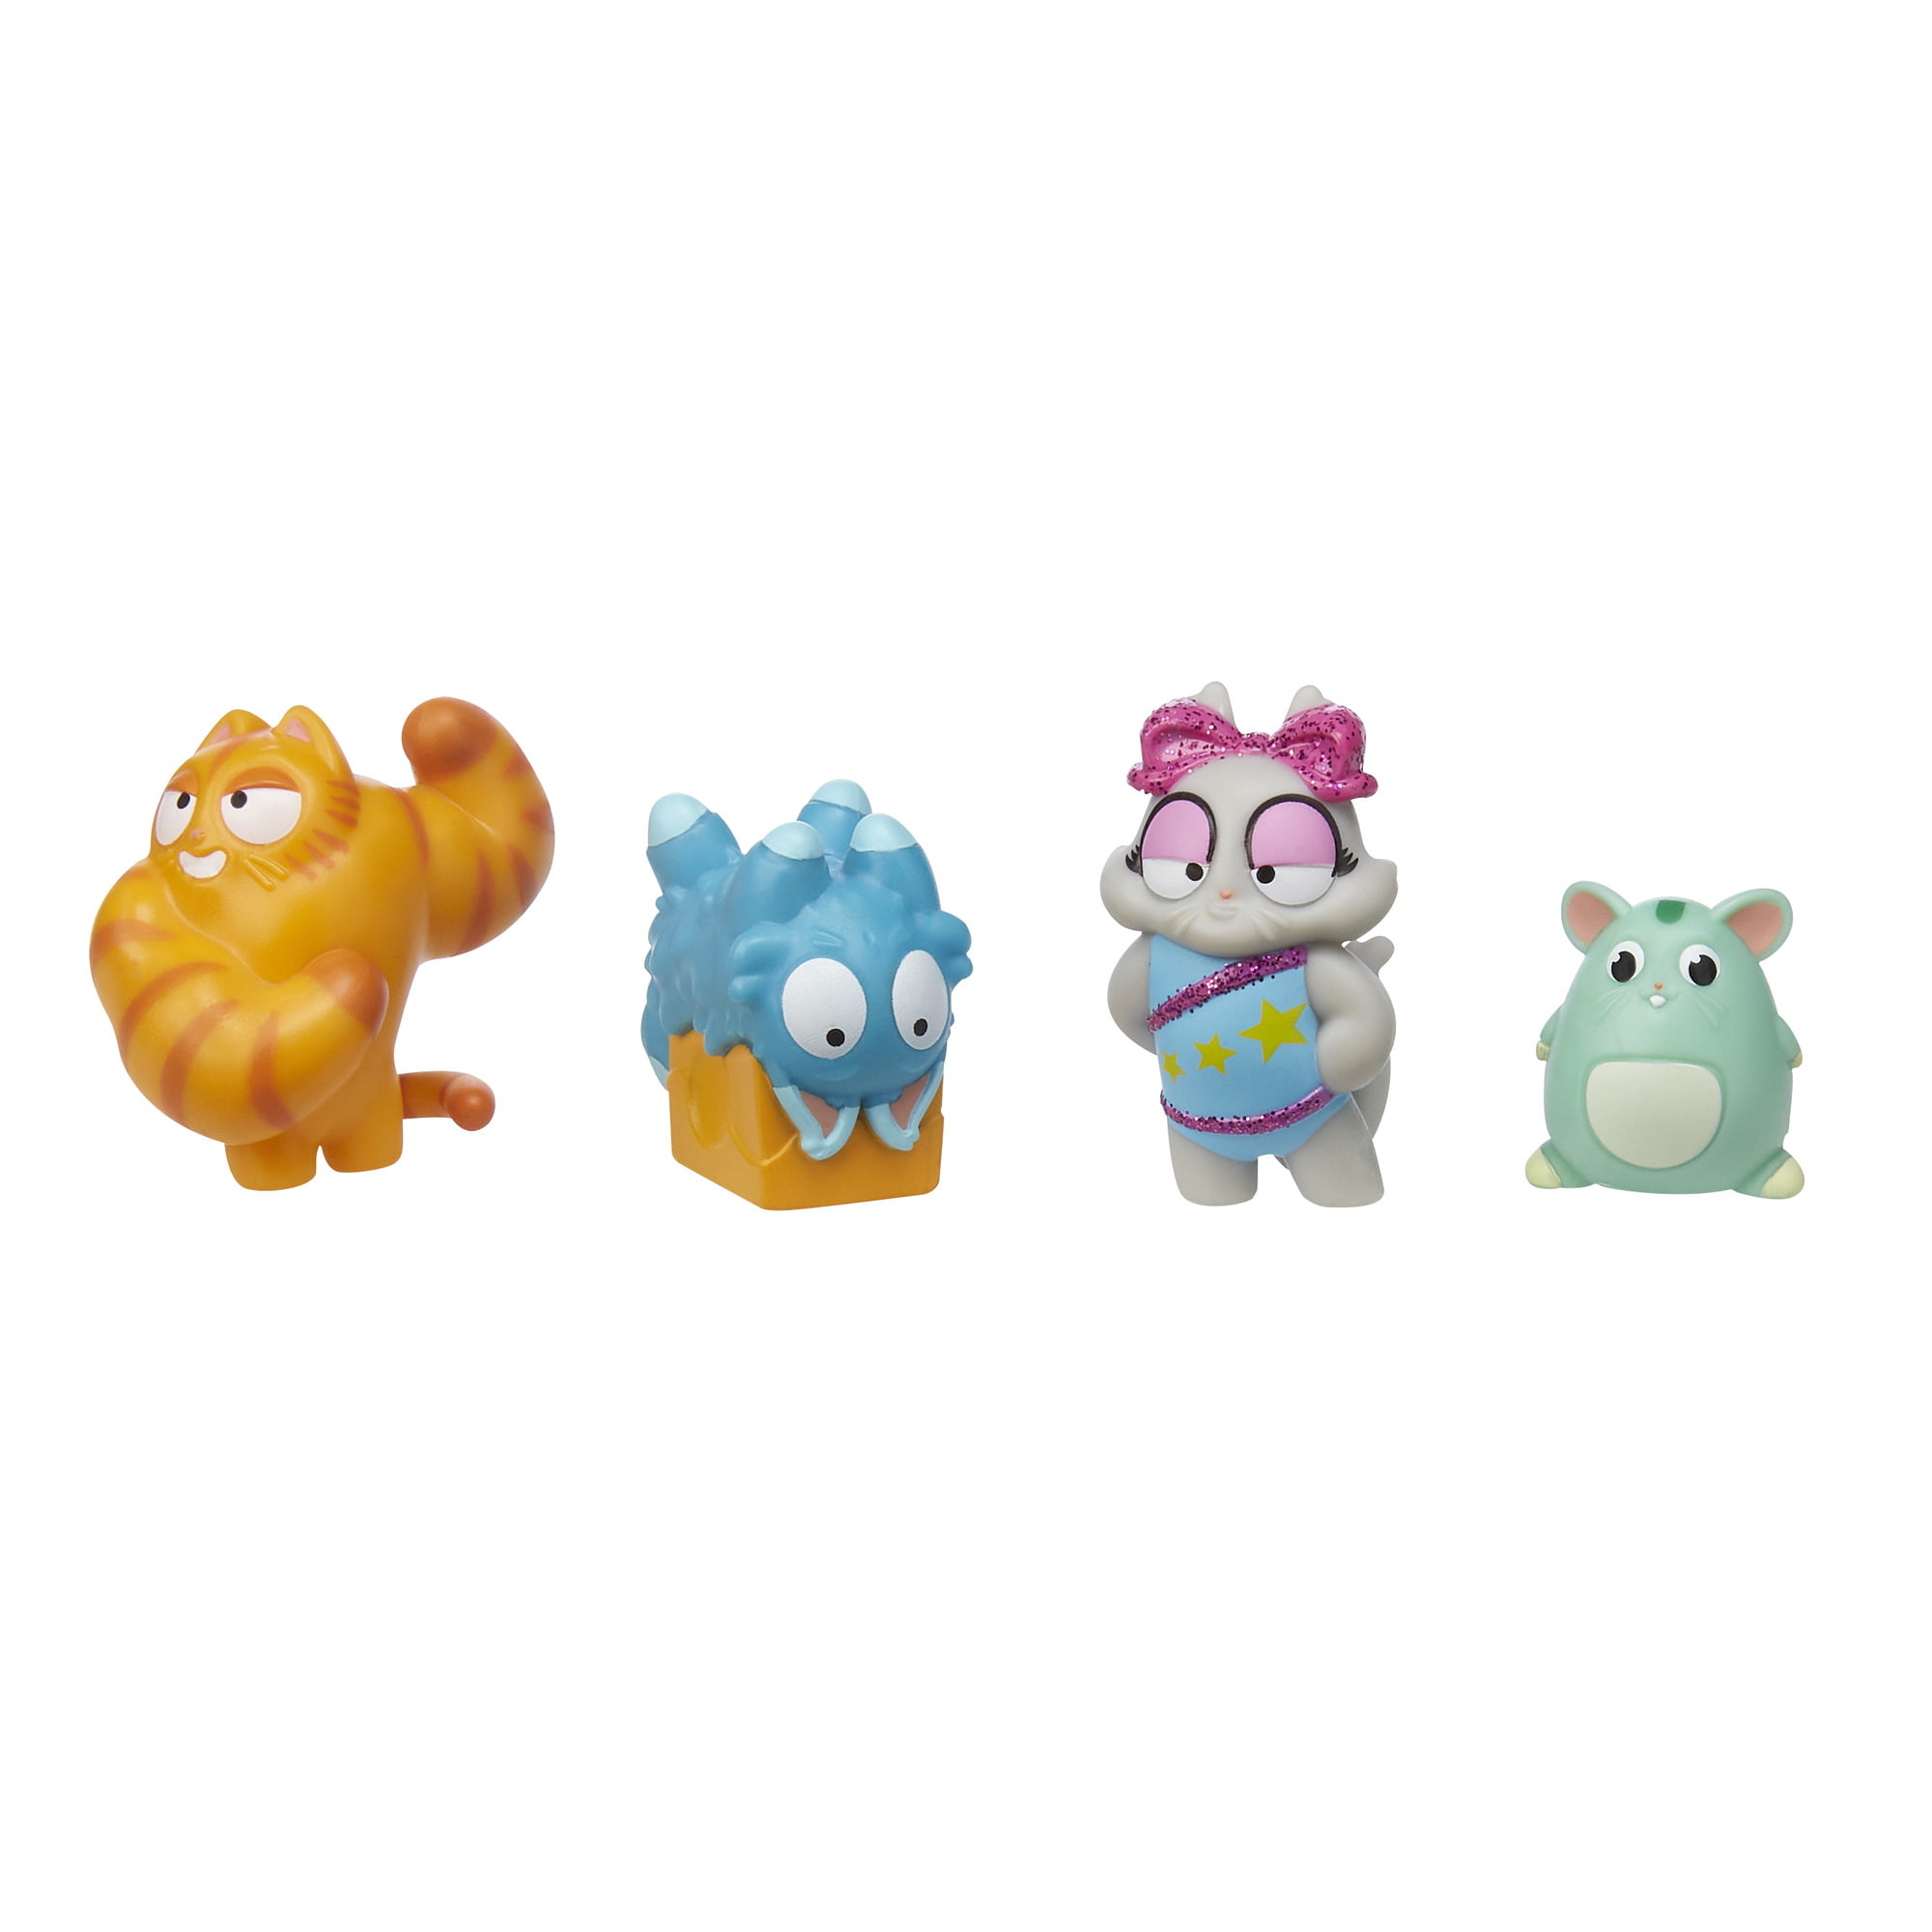 Hasbro's New Lost Kitties Mice Mania Lets Kids Dig Through “Cheese